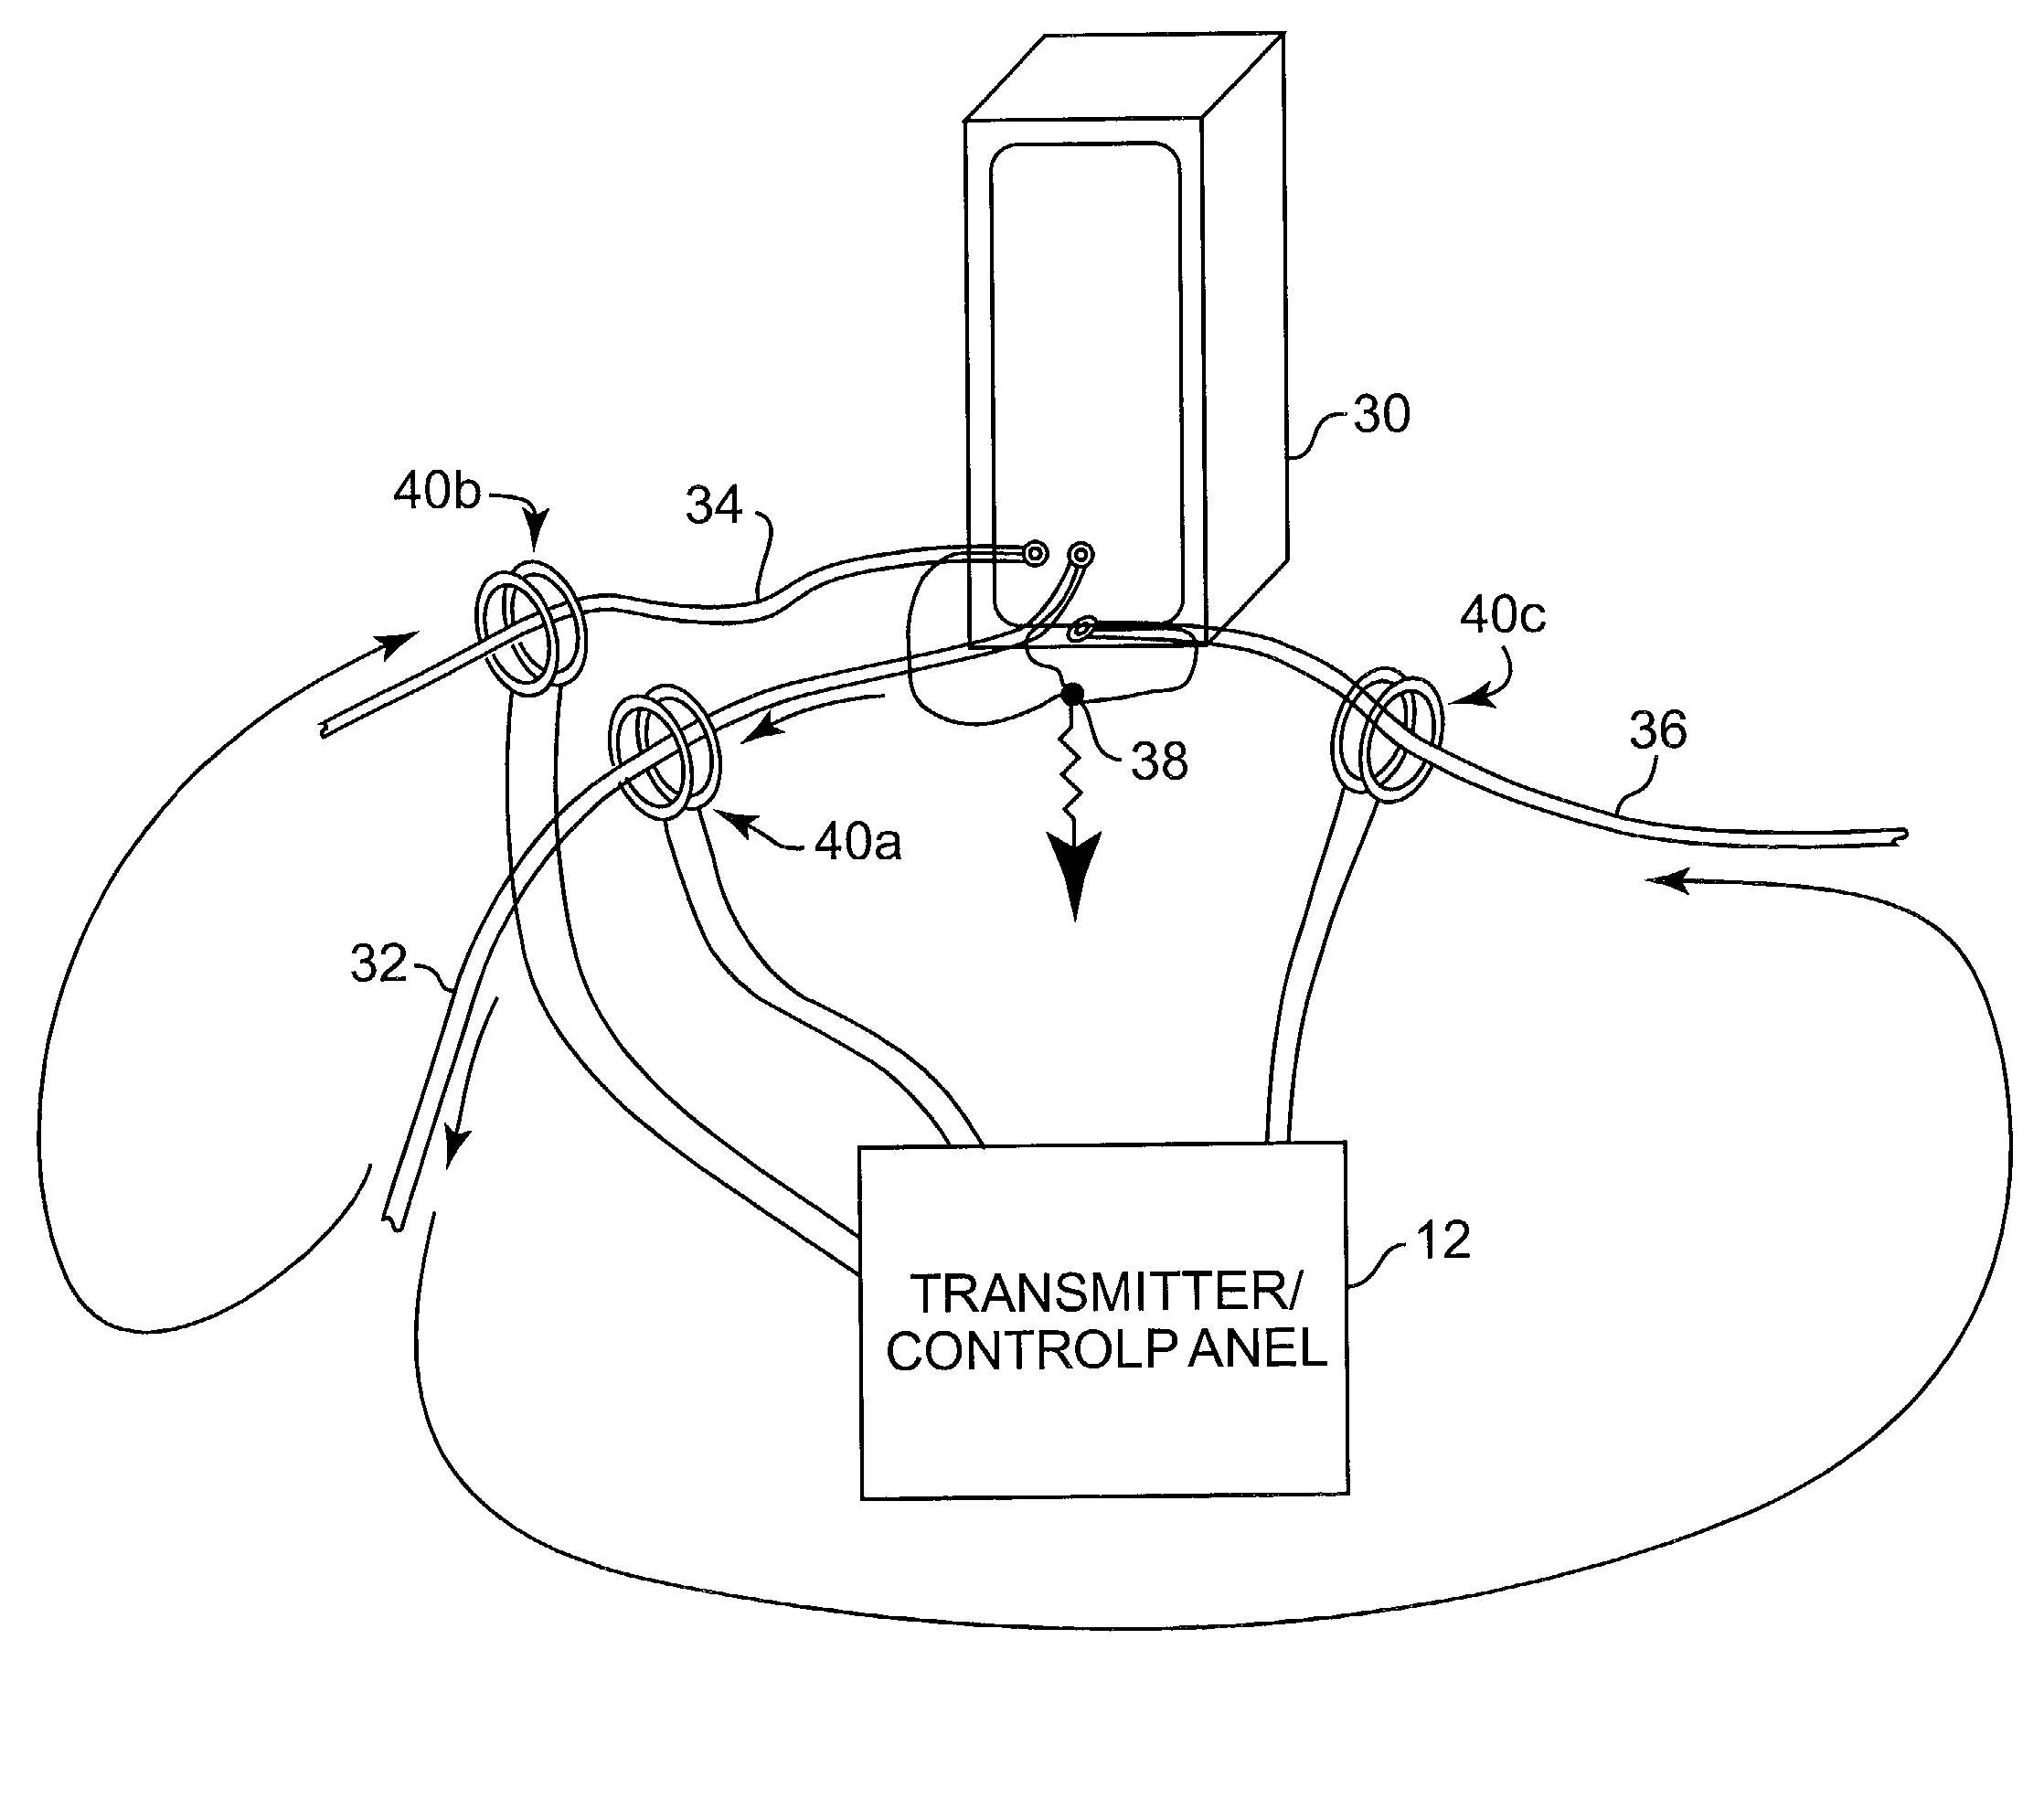 Cable location system using magnetic induction